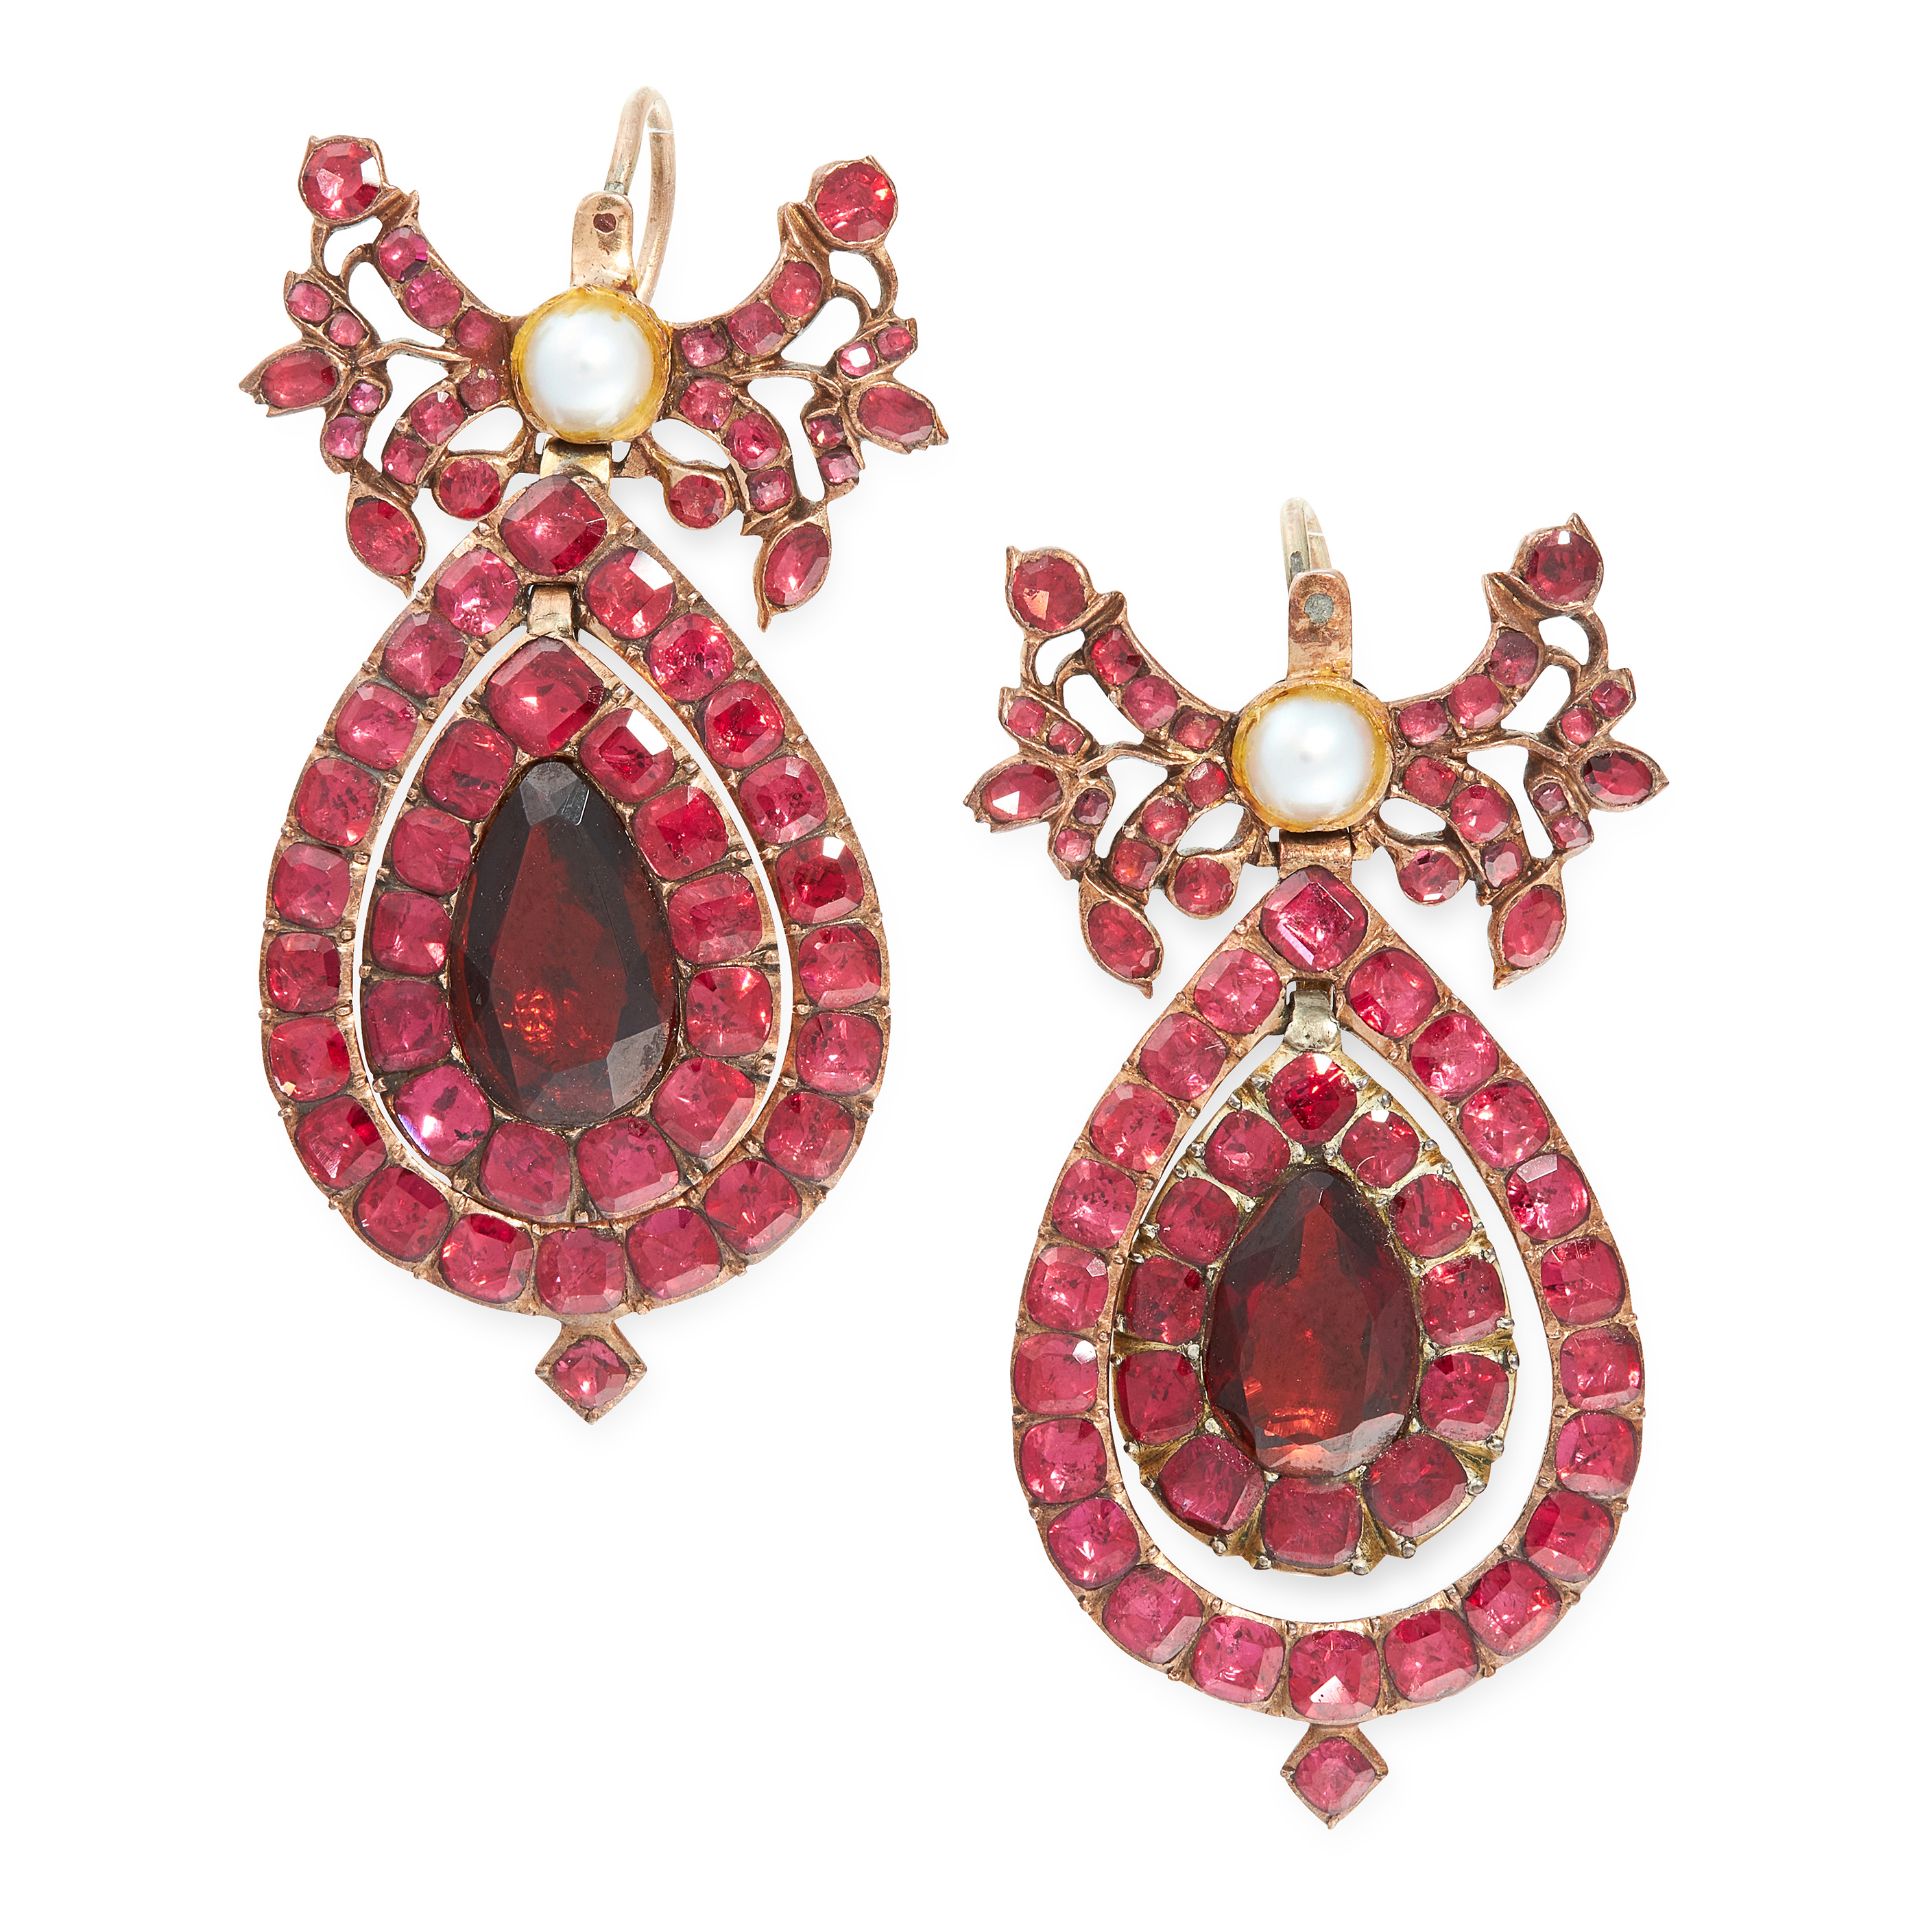 A PAIR OF ANTIQUE GARNET AND PEARL EARRINGS, SPANISH EARLY 19TH CENTURY in yellow gold, each set